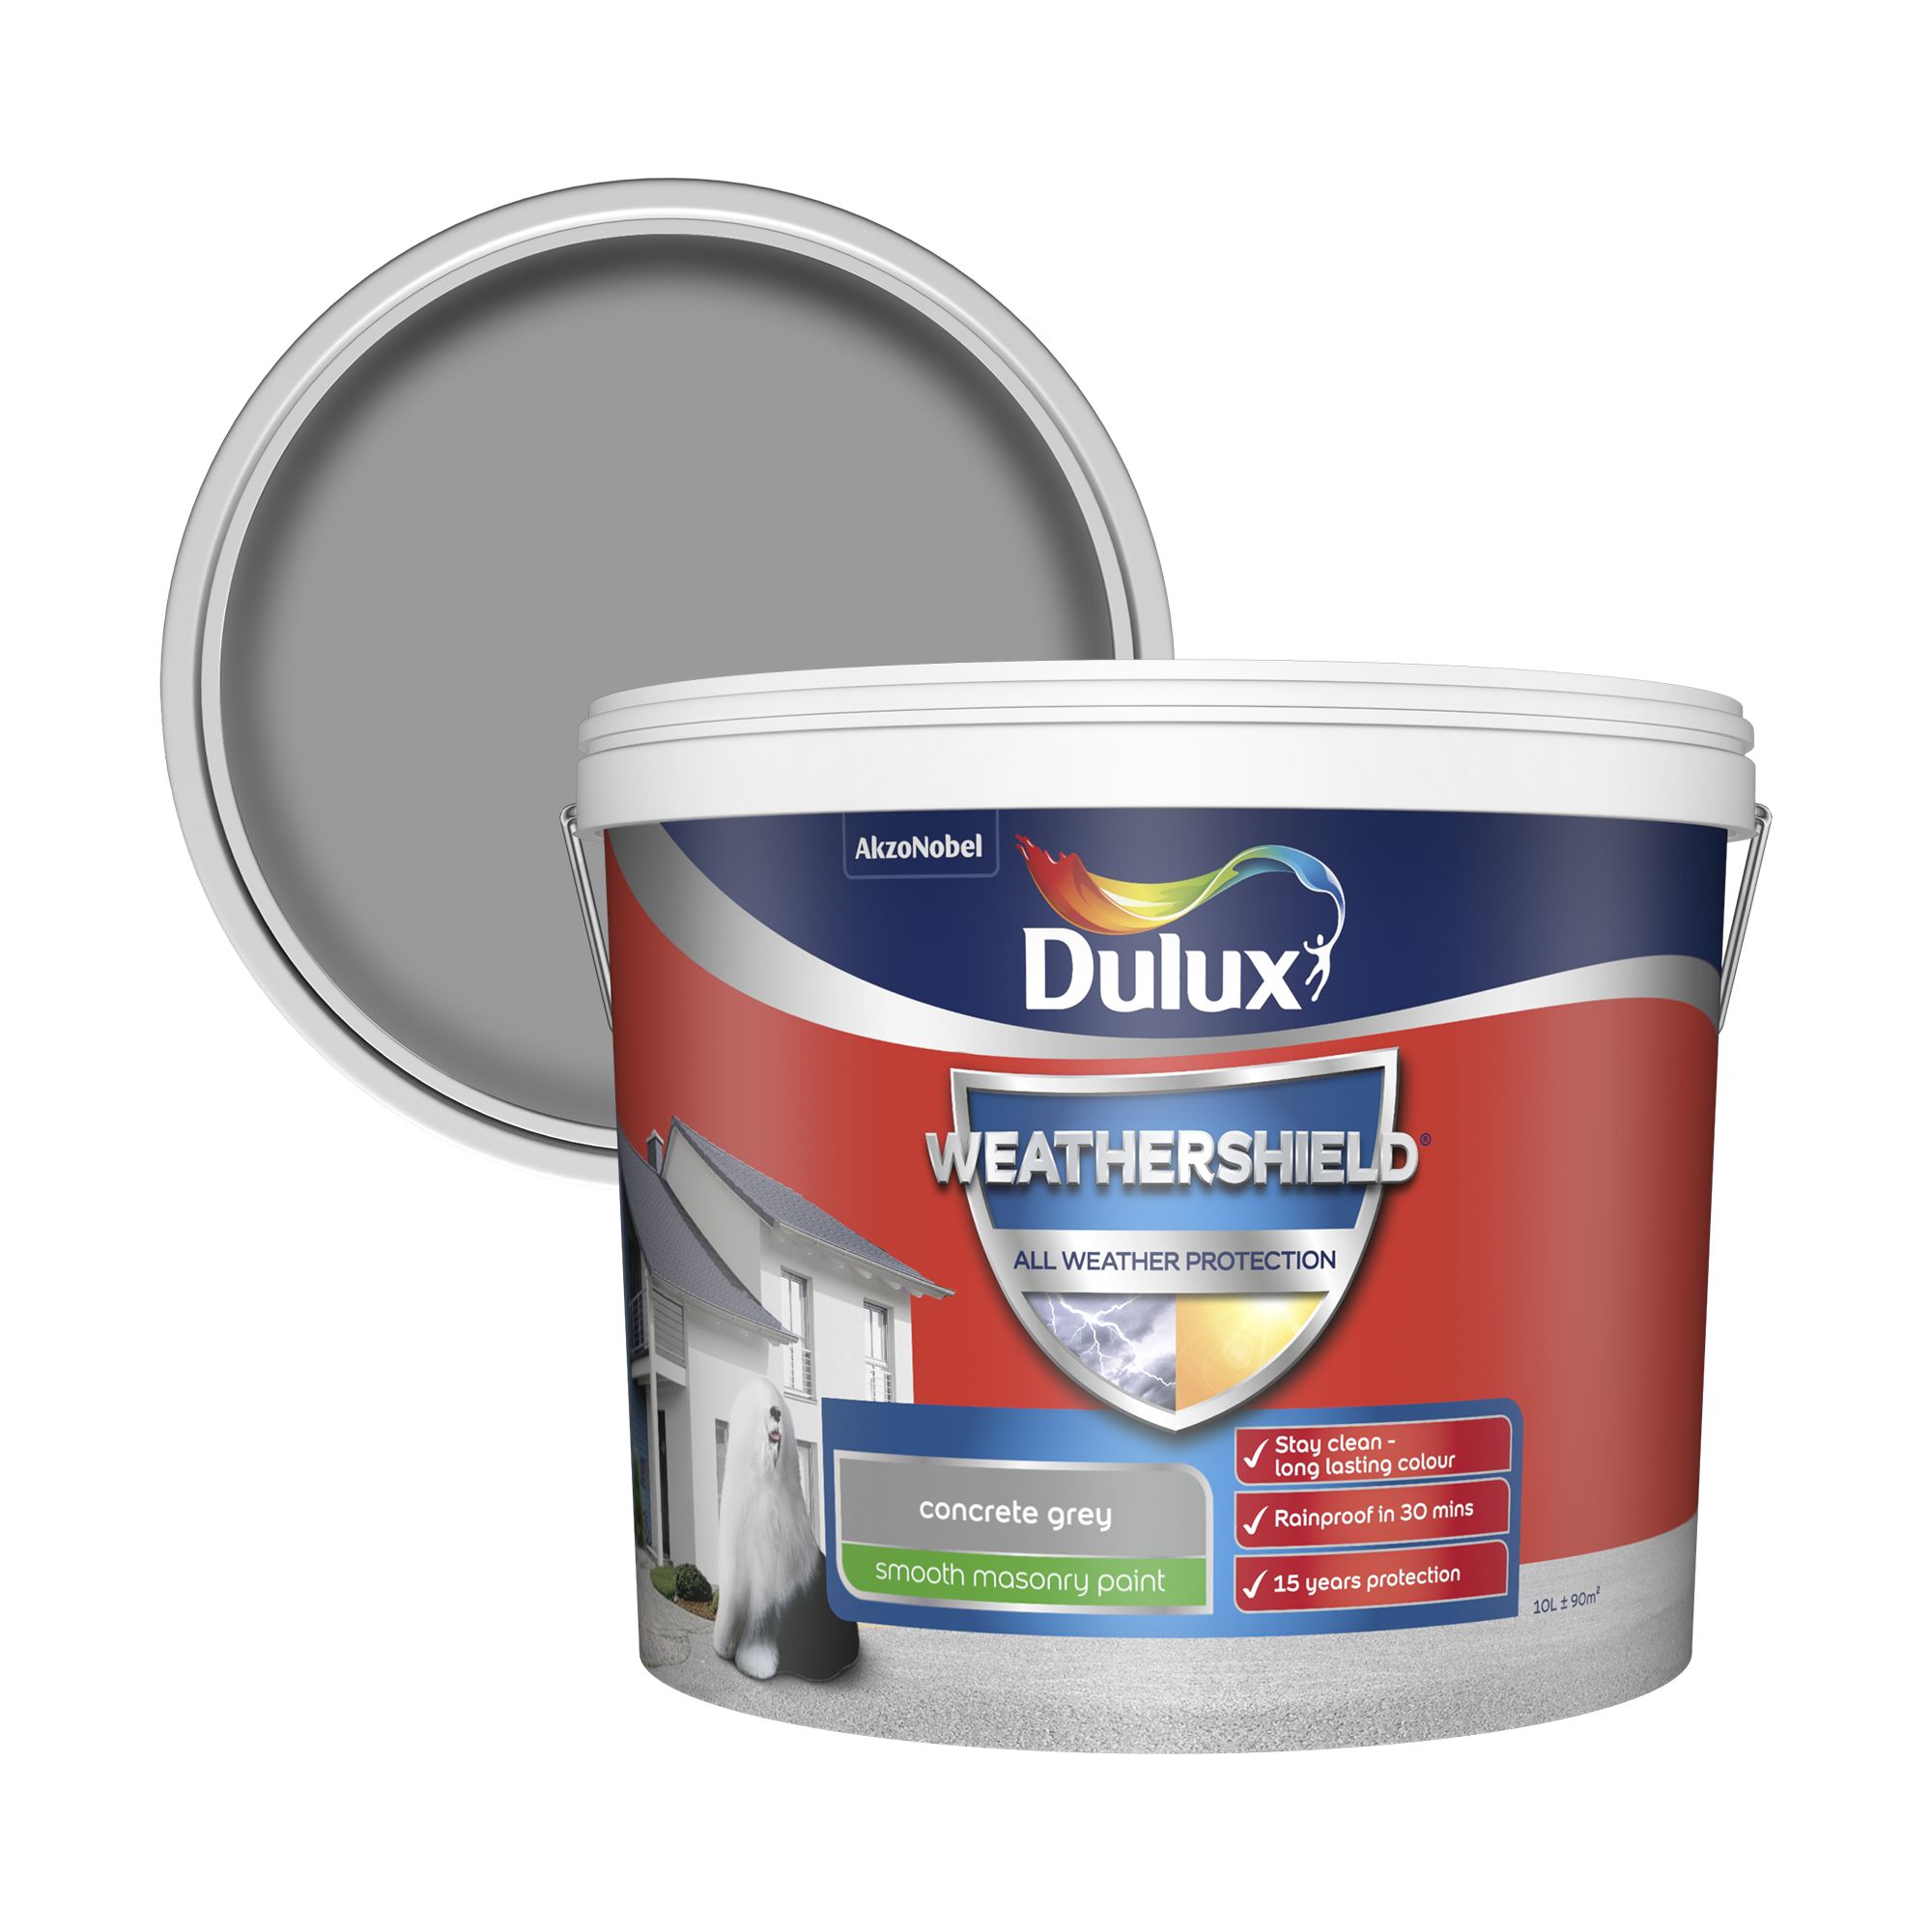  Dulux  Weathershield  All weather protection  Concrete grey 